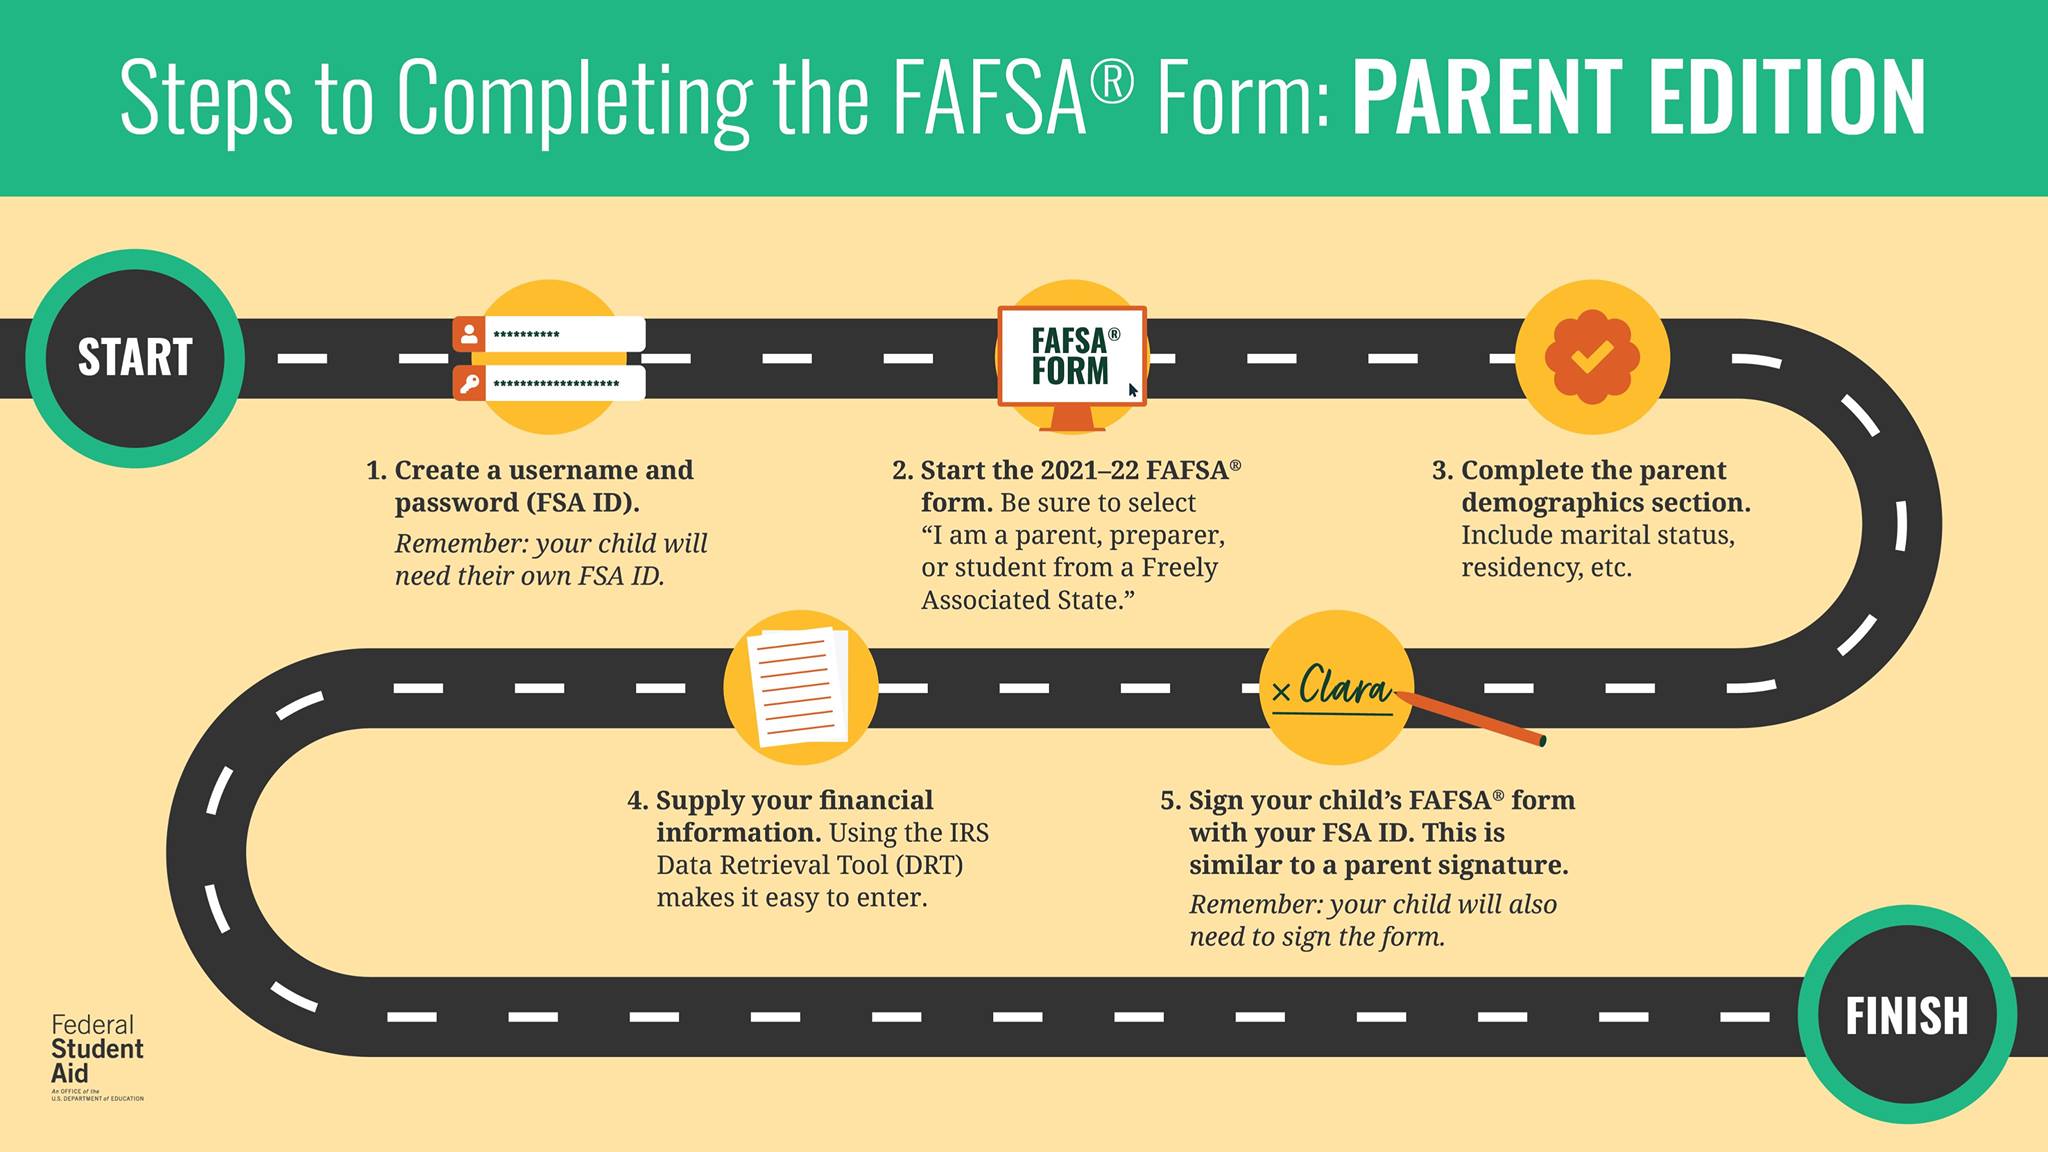 Steps to Completing the FAFSA